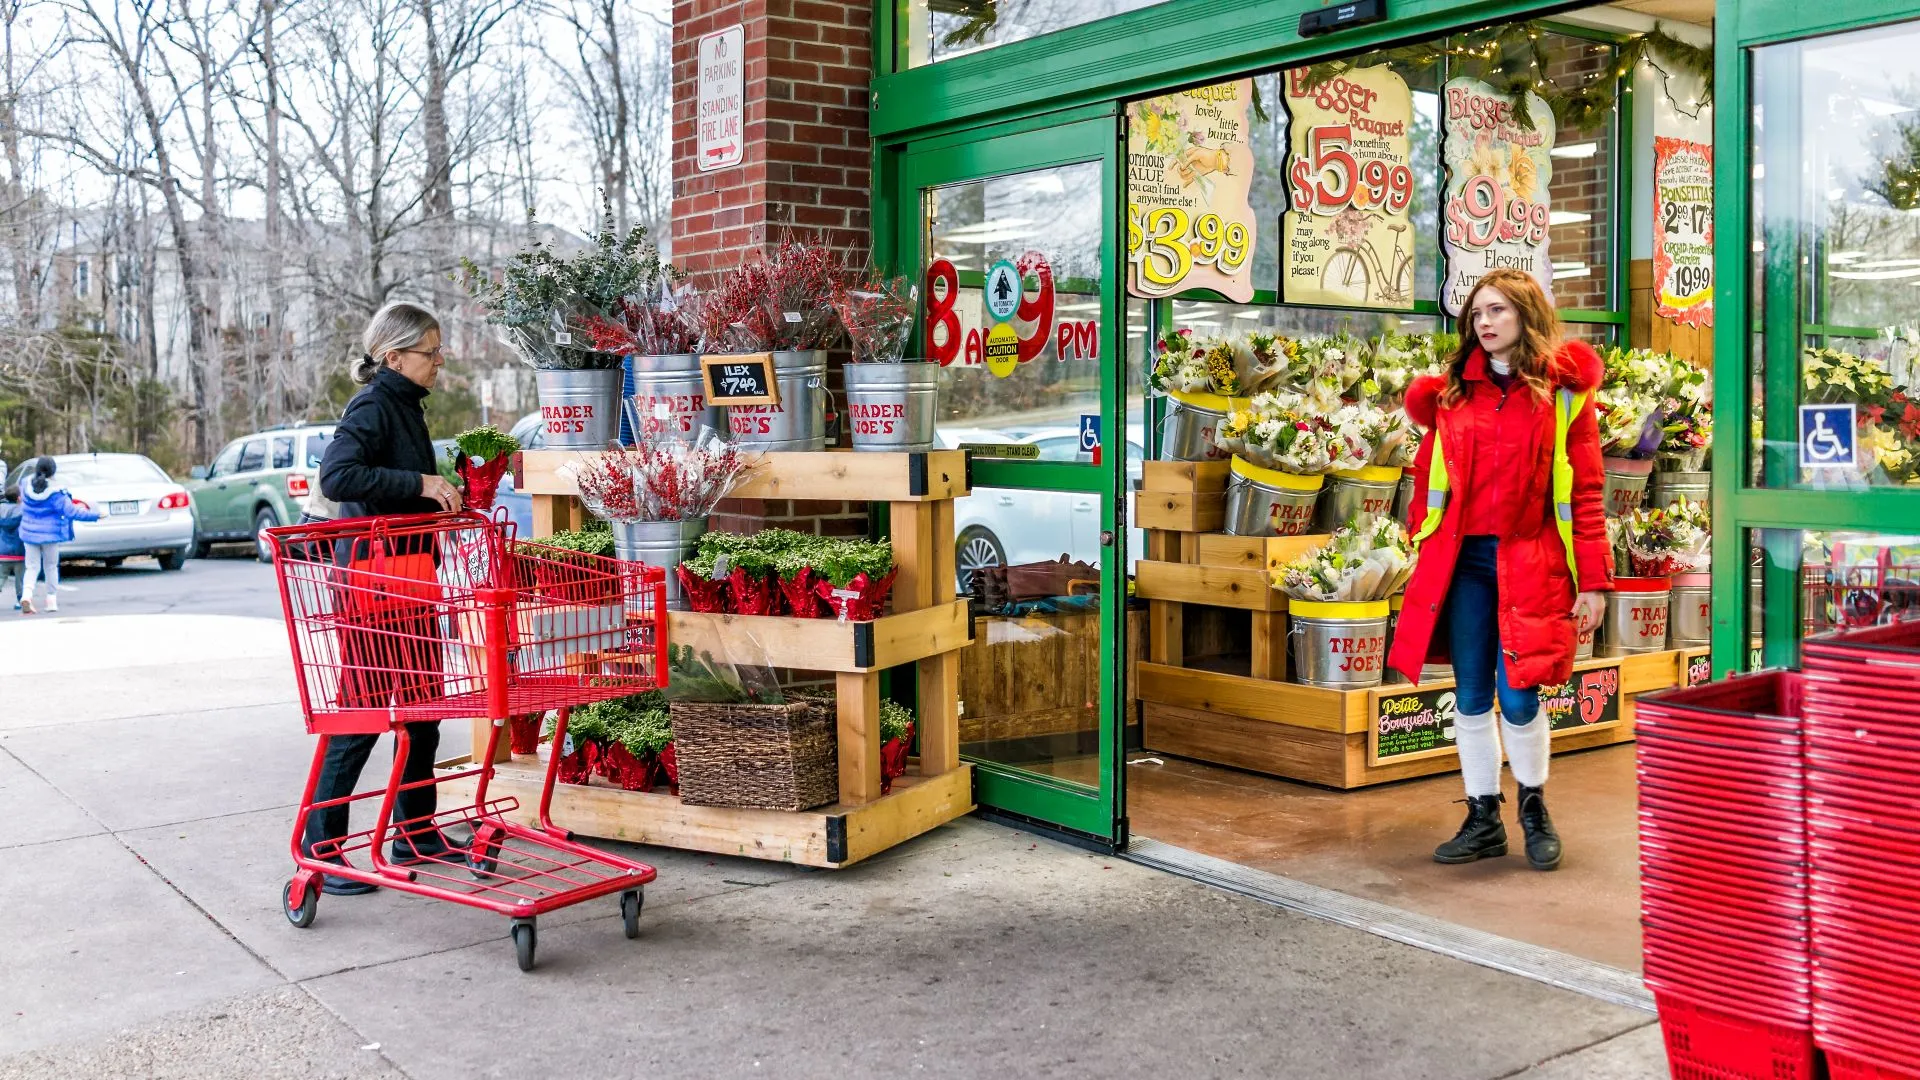 Reston, USA - December 18, 2017: Trader Joe's employee in red clothes with customer, trolley shopping carts by store entrance doors outside women, winter flower pots, gardening plants in Virginia.